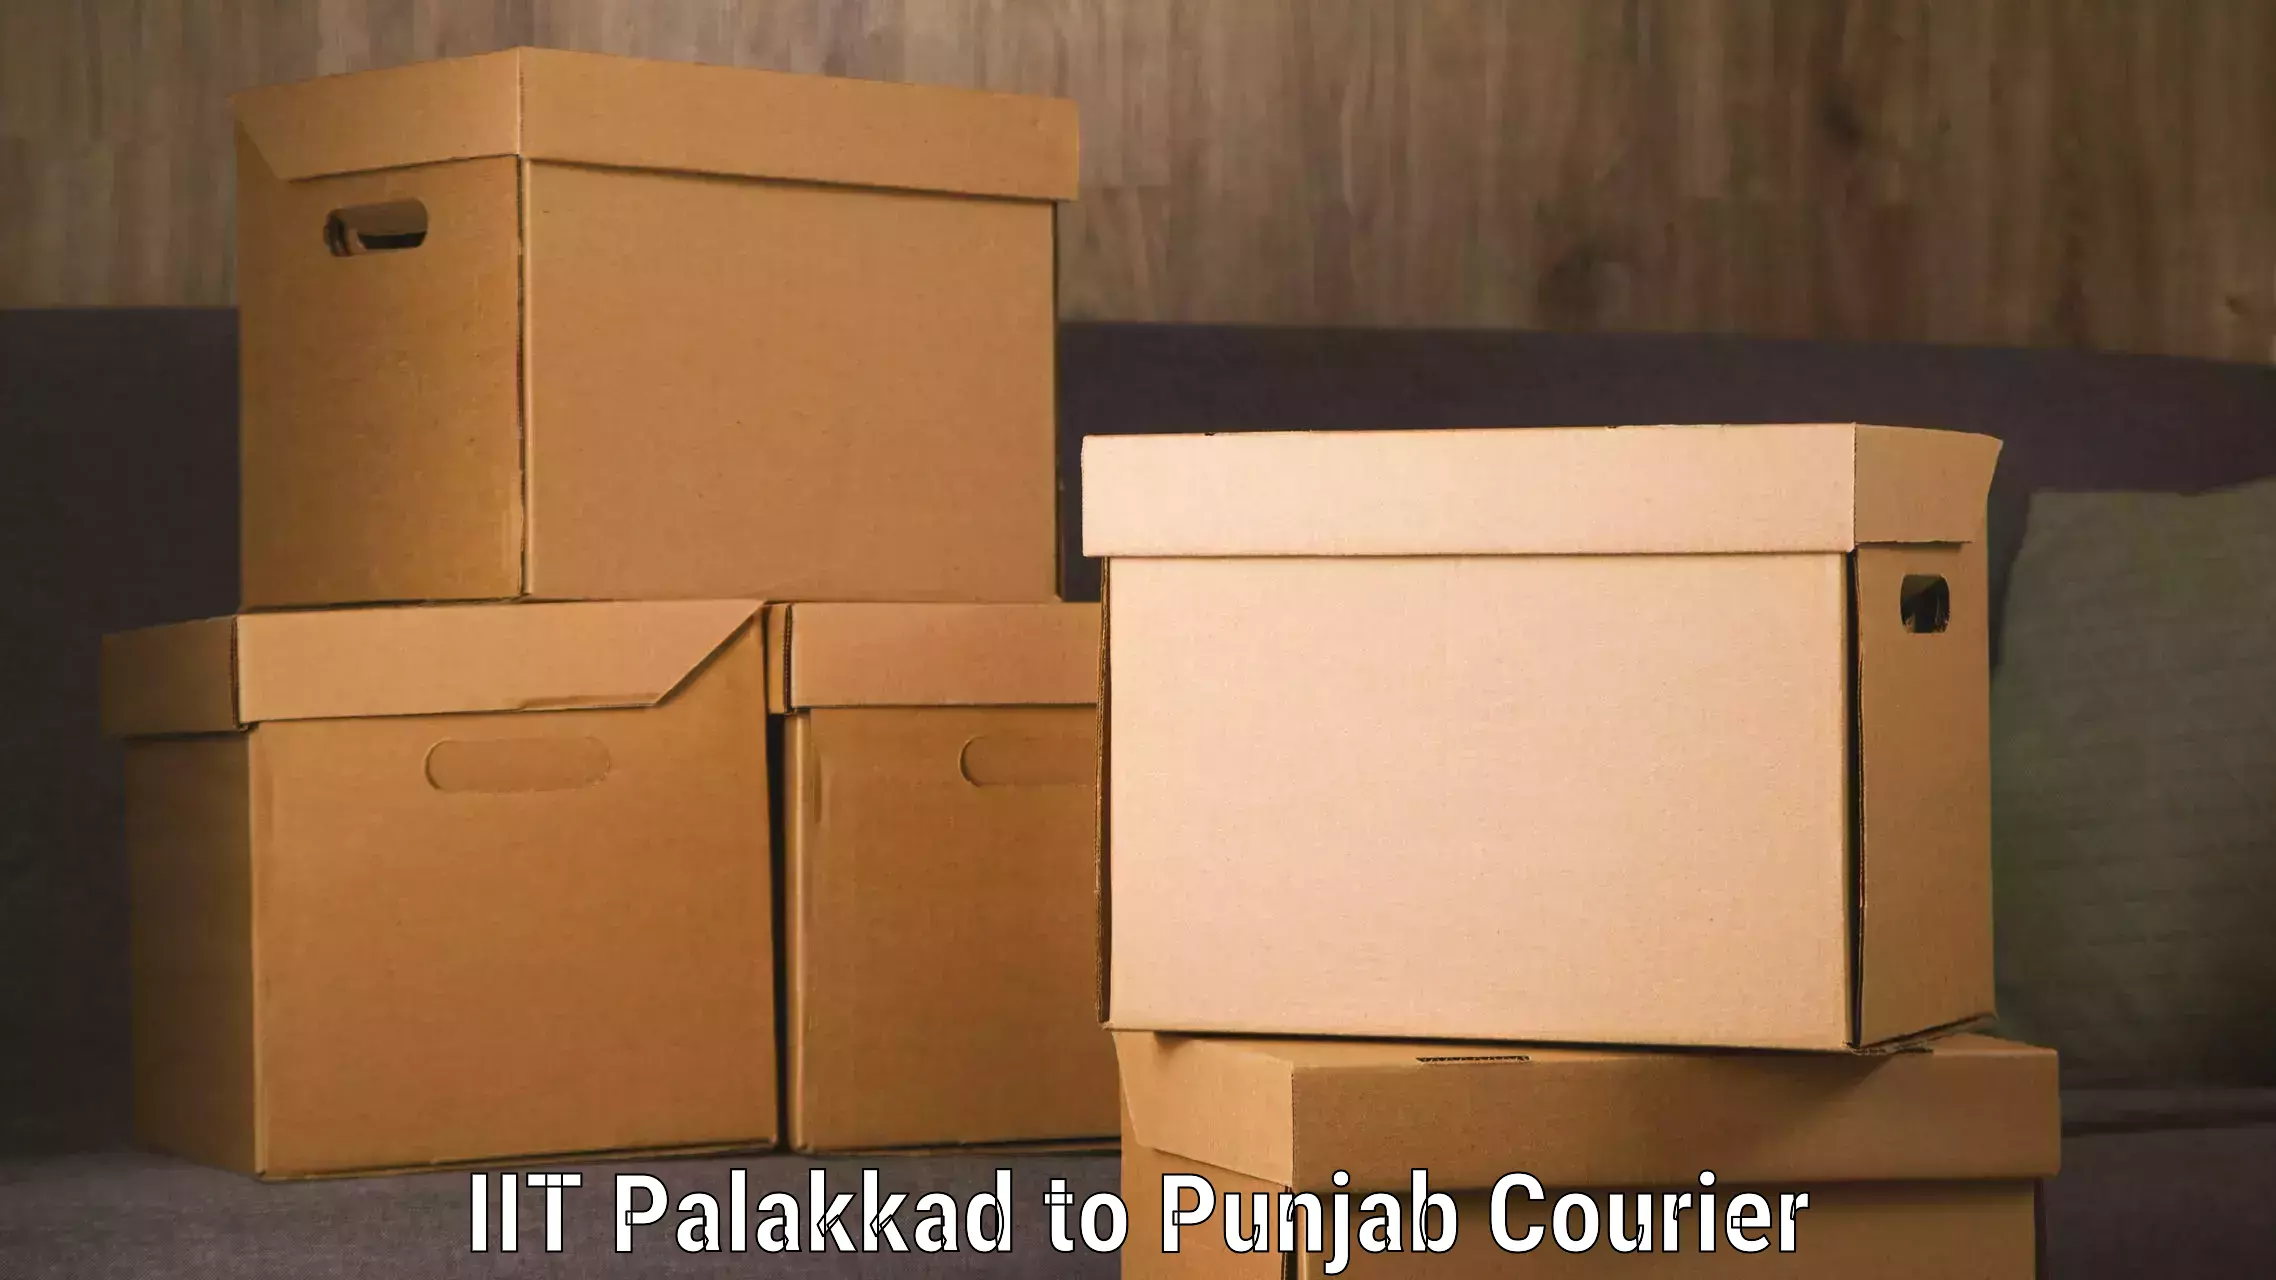 Reliable courier service in IIT Palakkad to Central University of Punjab Bathinda